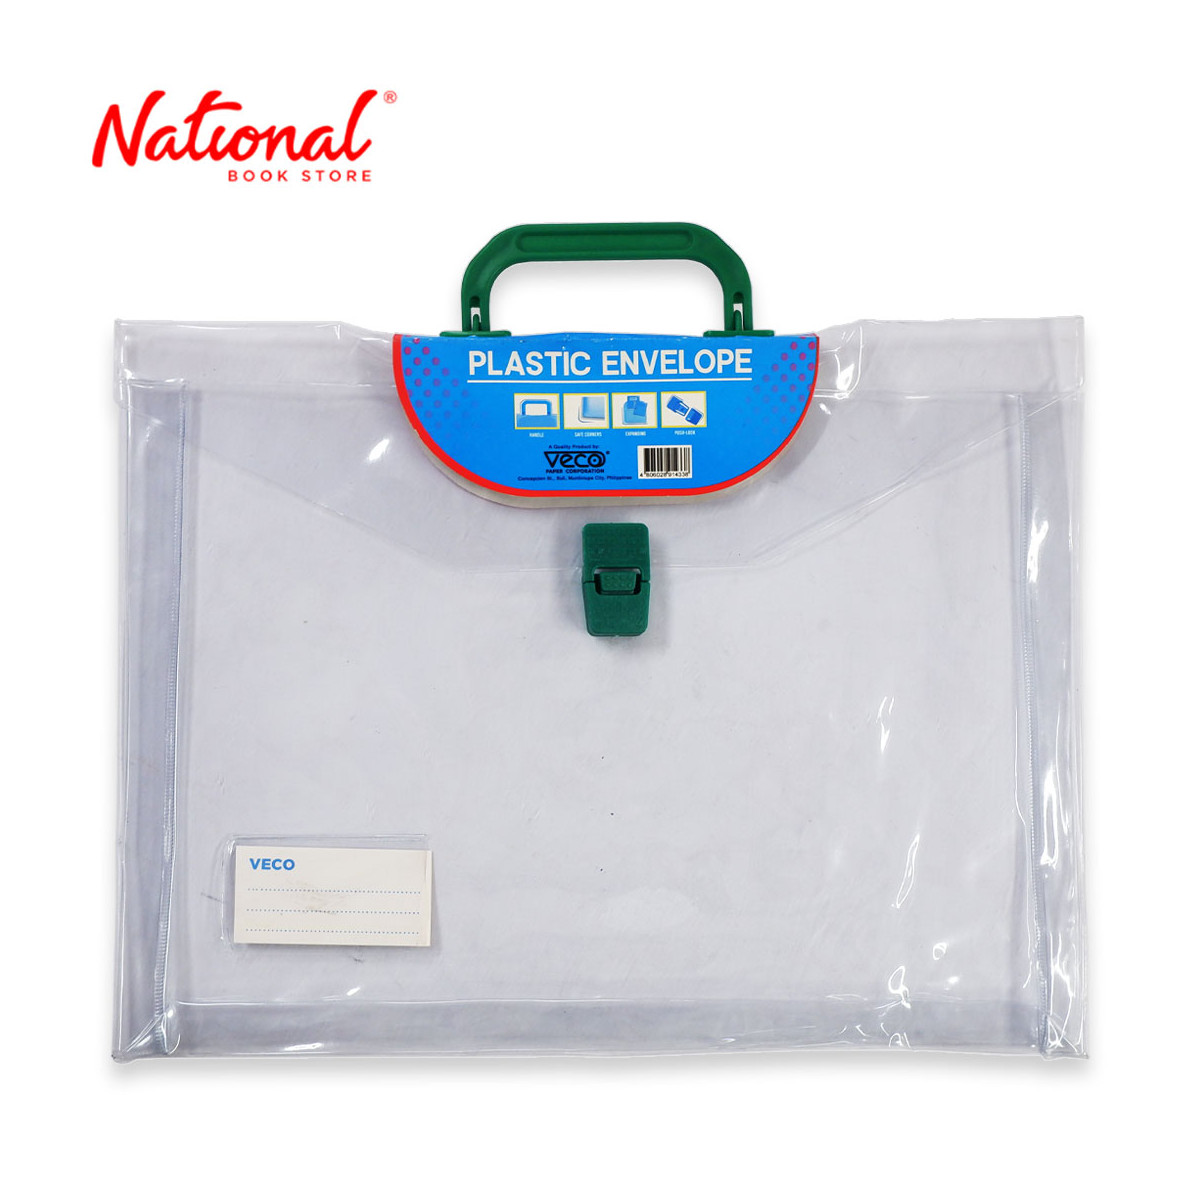 Veco Plastic Envelope with Handle Long Gauge 10 Clear Colored Handle Expandable, Green